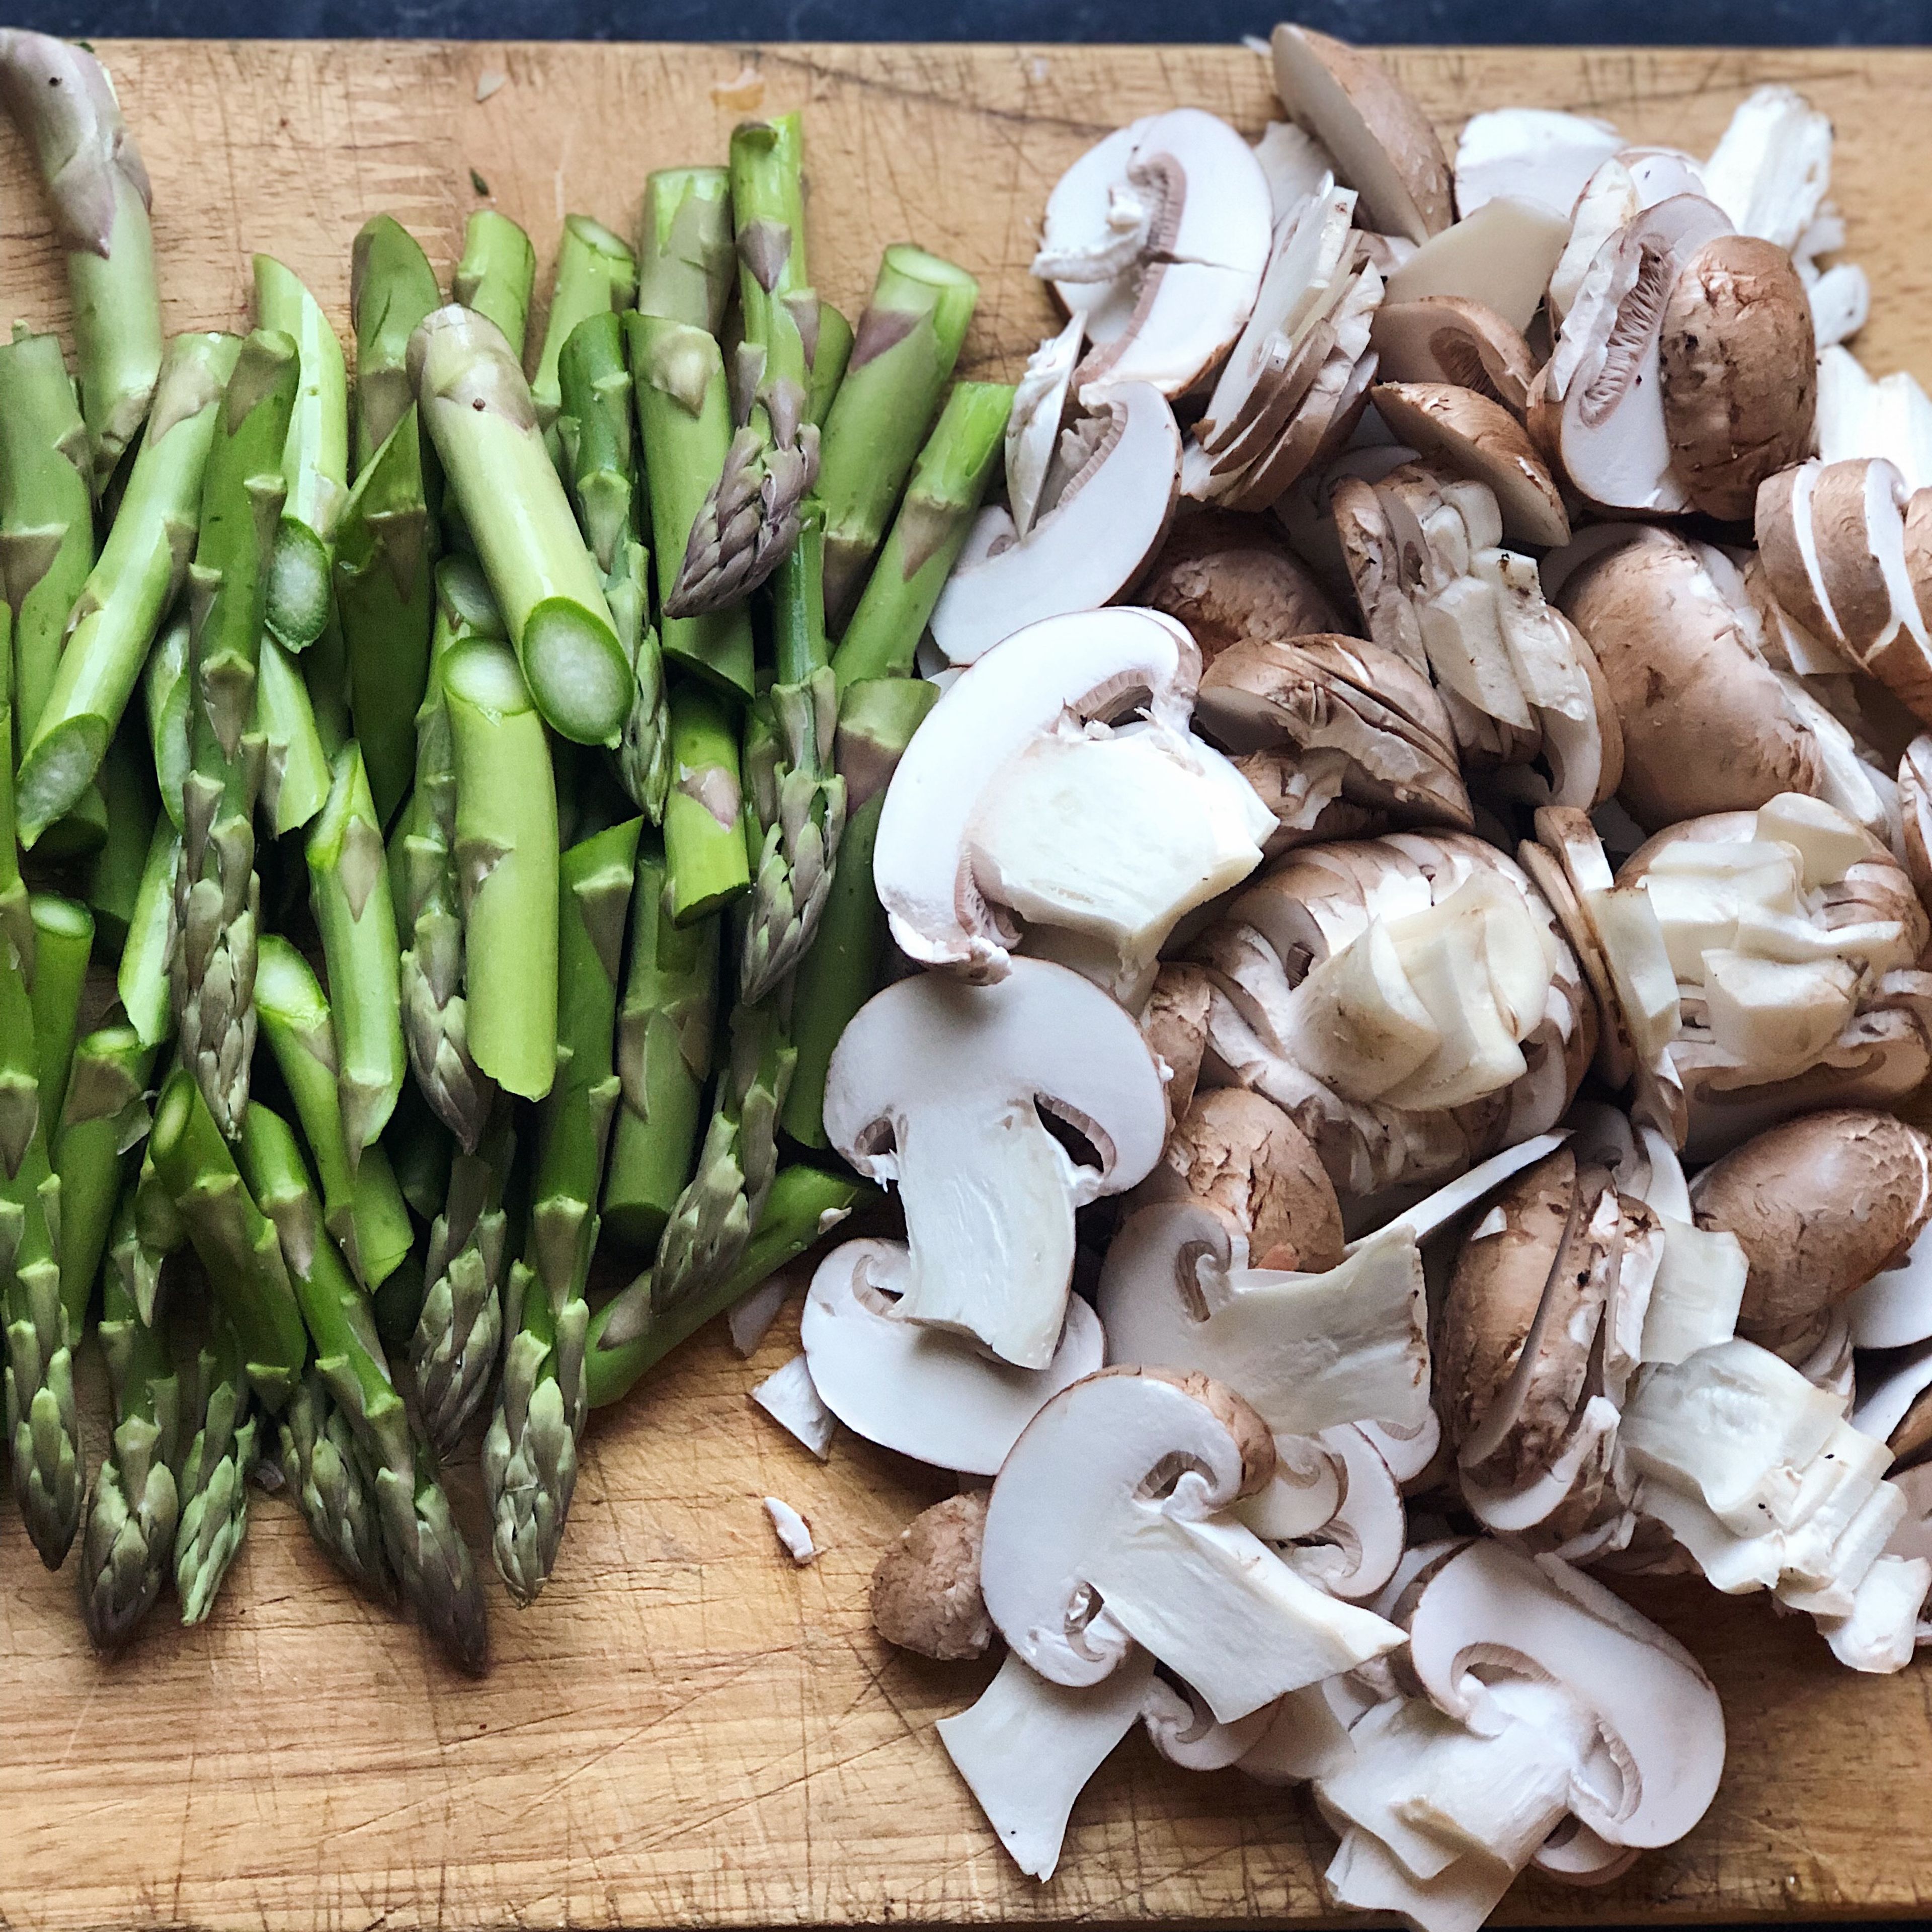 While sweating onions, roughly chop the mushrooms and asparagus